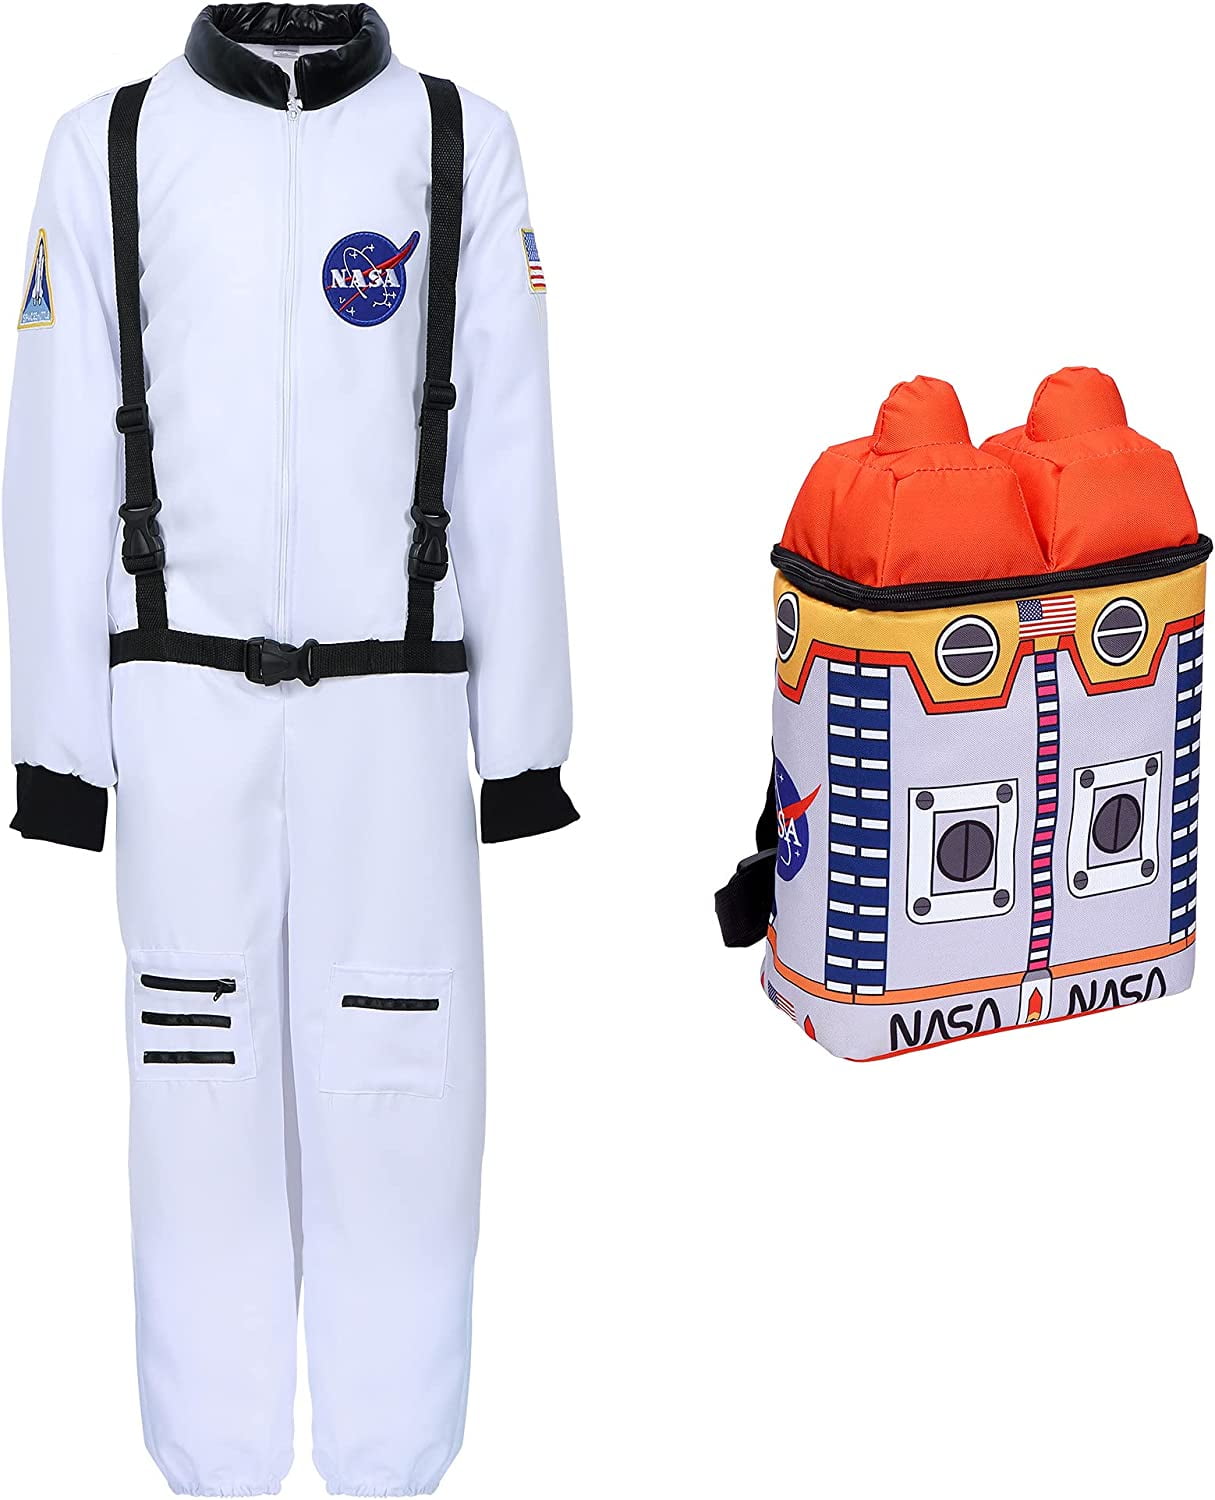 Astronaut Children's Dress Up with Space Rocket Bag for Kids Aged